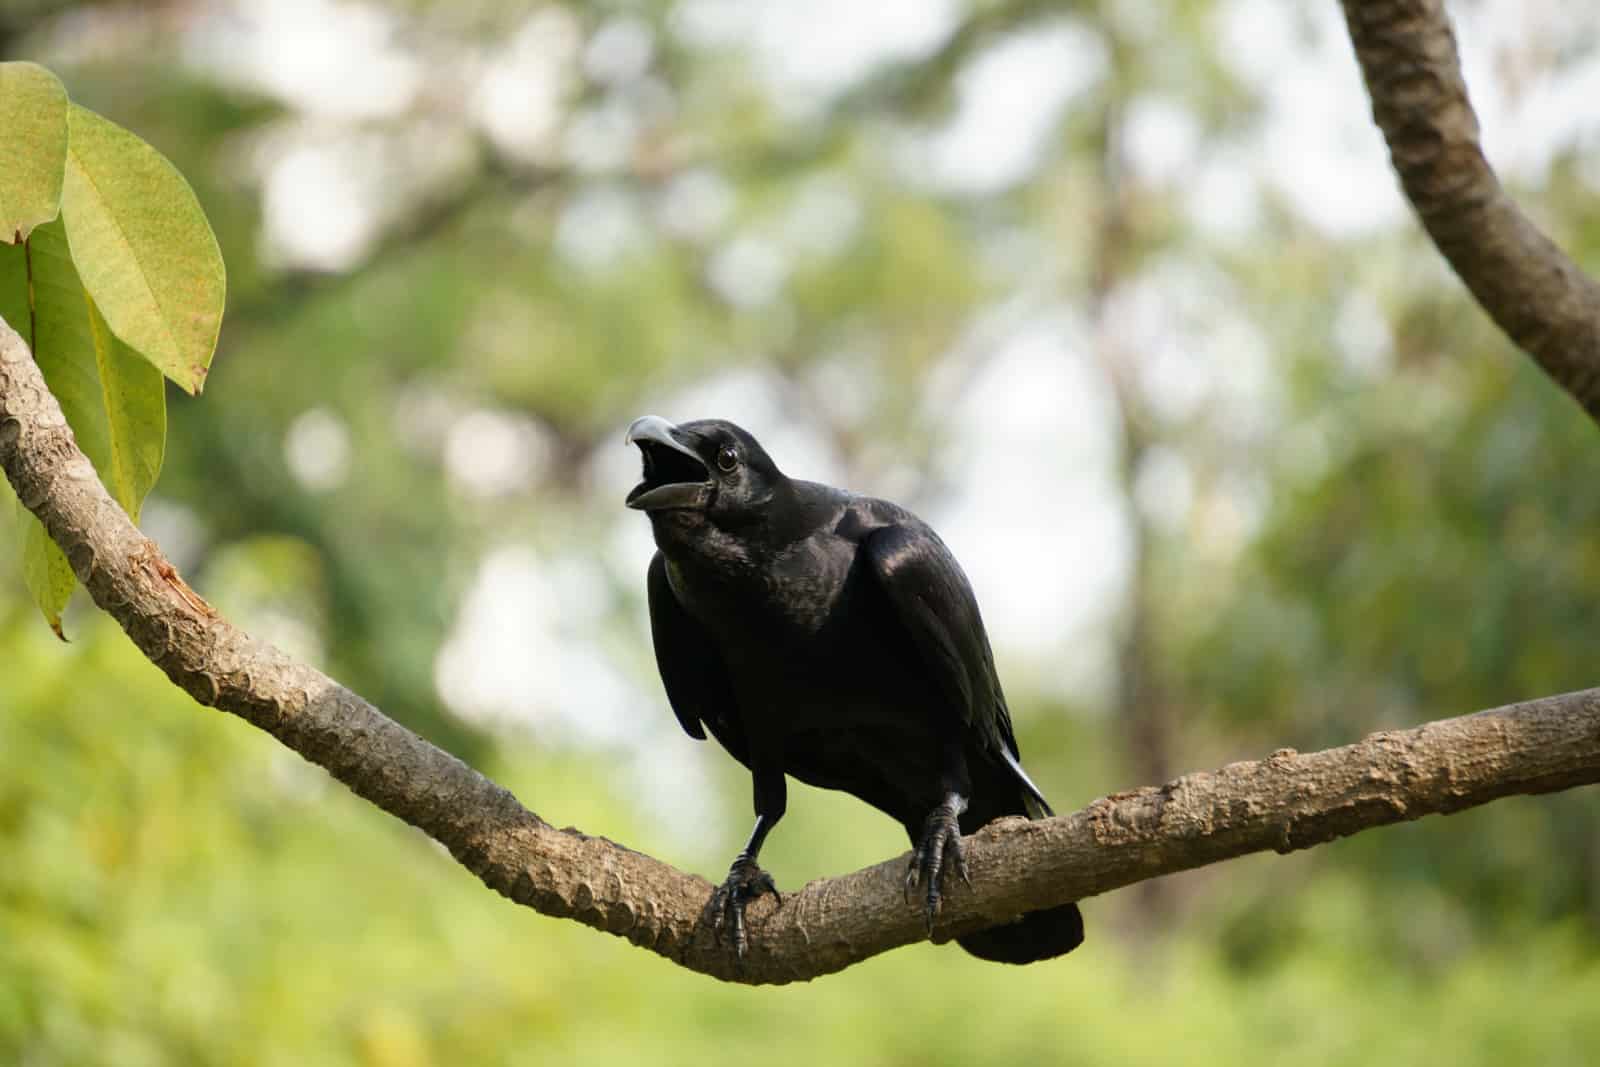 A crow chirping on the tree